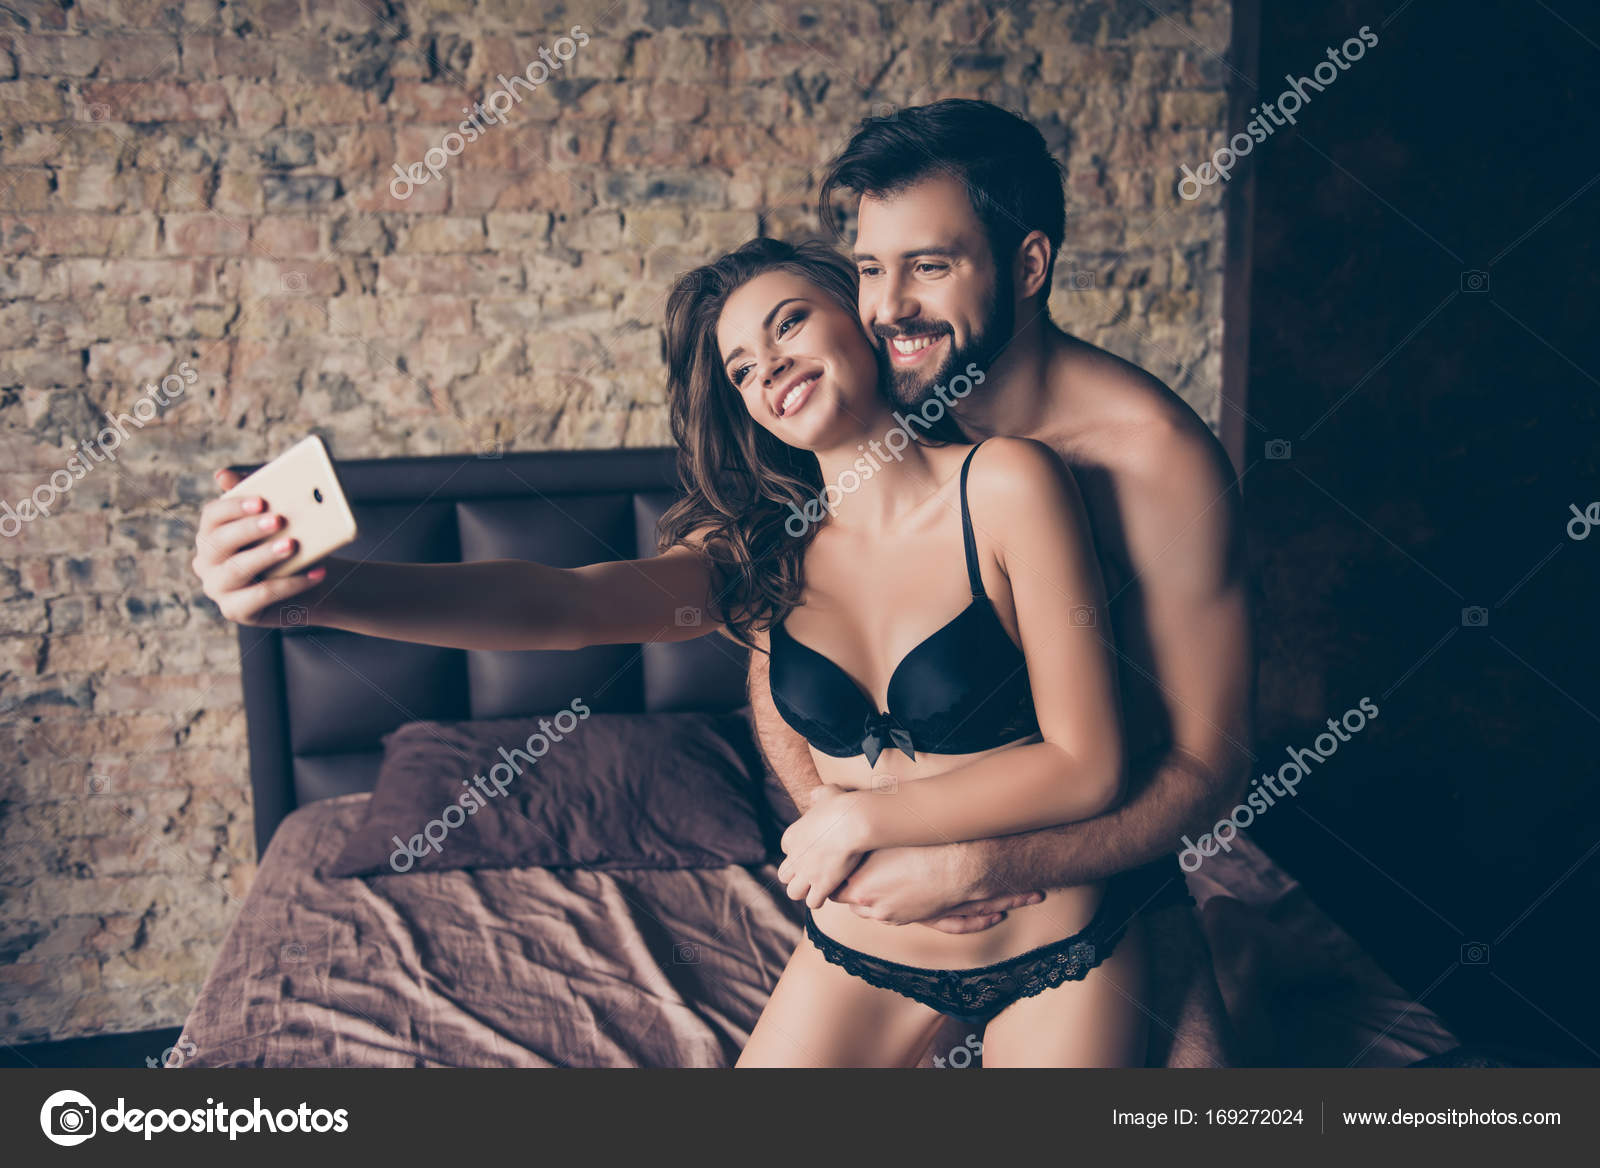 Beautiful Half Naked Brunet Couple Is Embracing In Bed Lady Tak Stock Photo Deagreez 128772 Hot Sex Picture photo